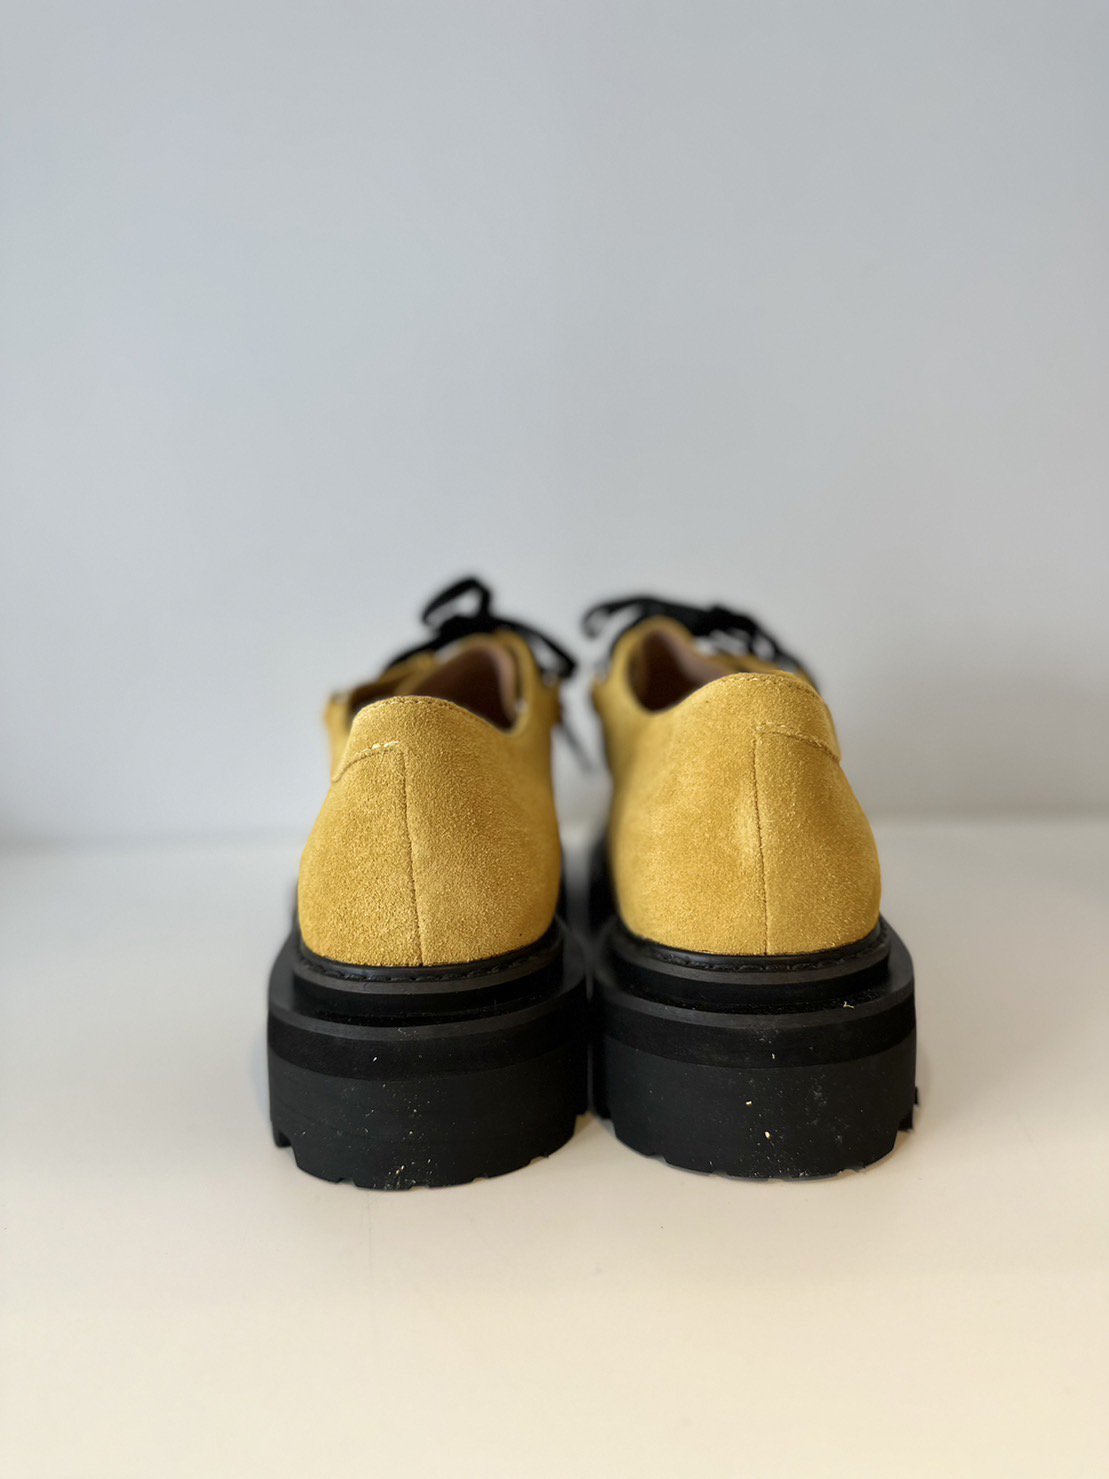 DAIRIKU<br />Suede Derby Shoes / Yellow<img class='new_mark_img2' src='https://img.shop-pro.jp/img/new/icons14.gif' style='border:none;display:inline;margin:0px;padding:0px;width:auto;' />